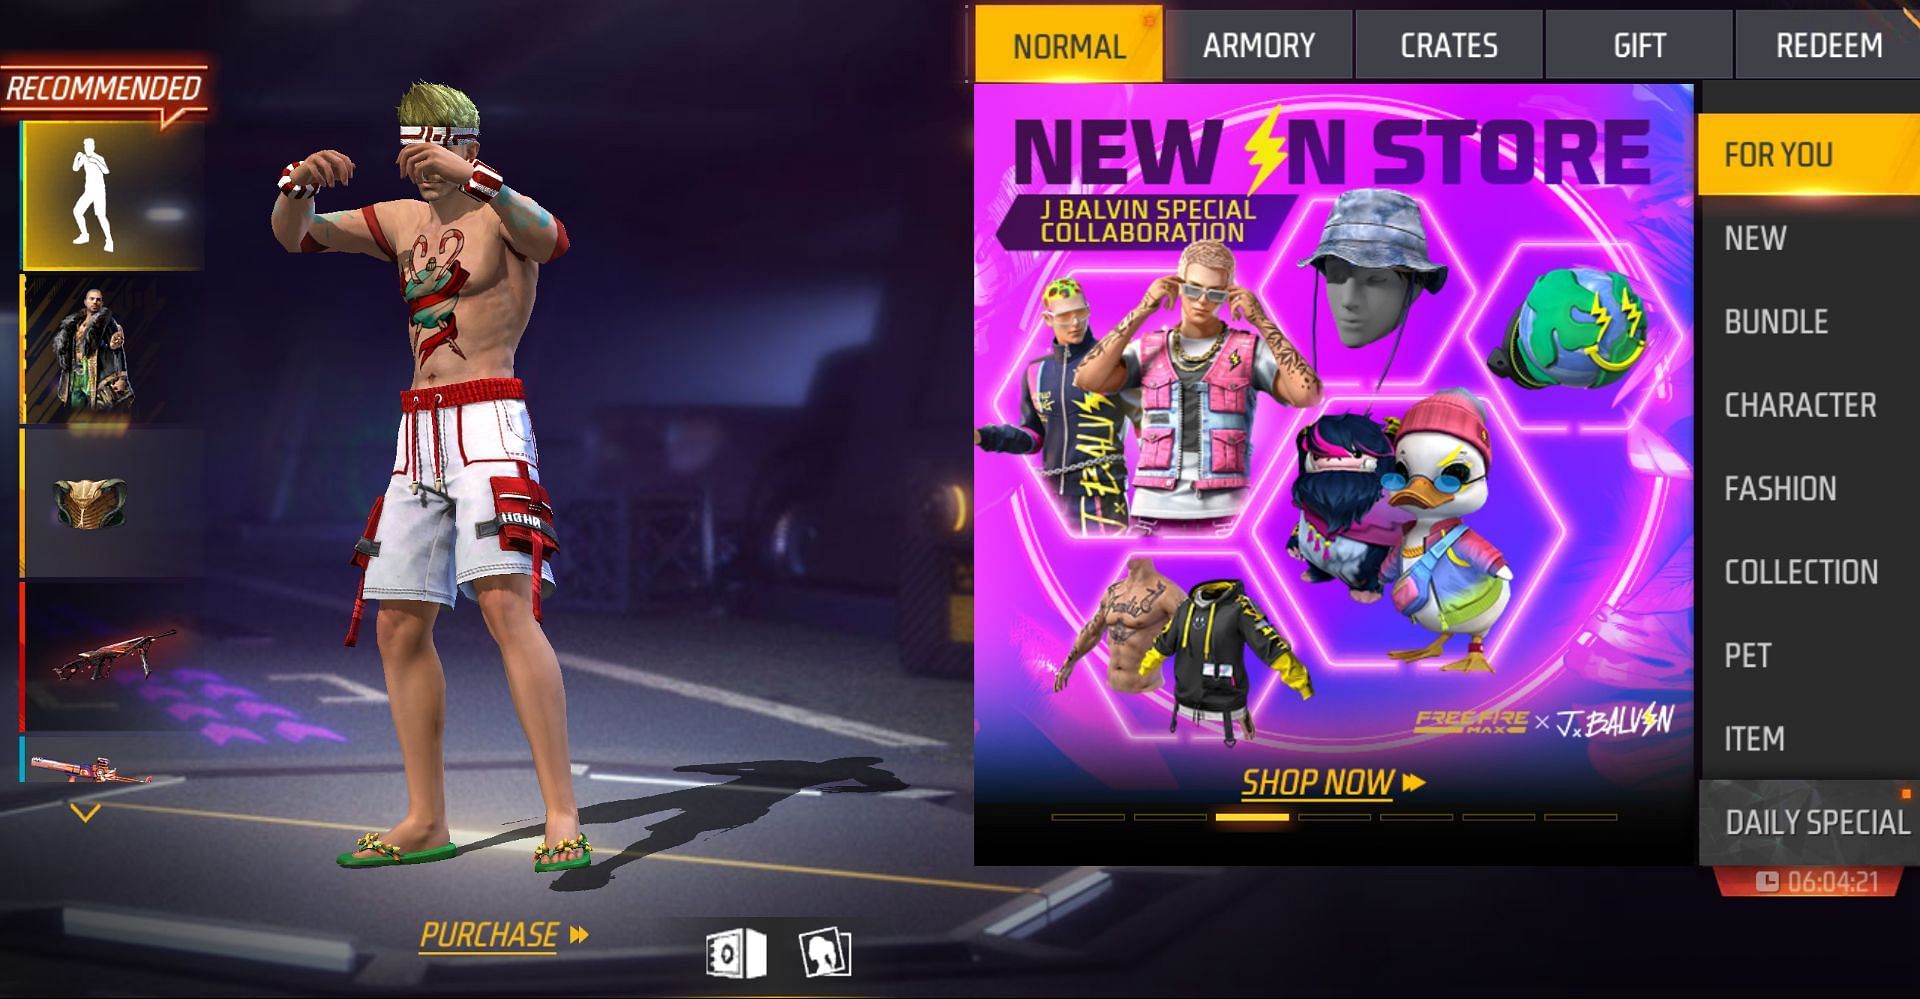 J Balvin collaboration items are available in the store (Image via Garena)